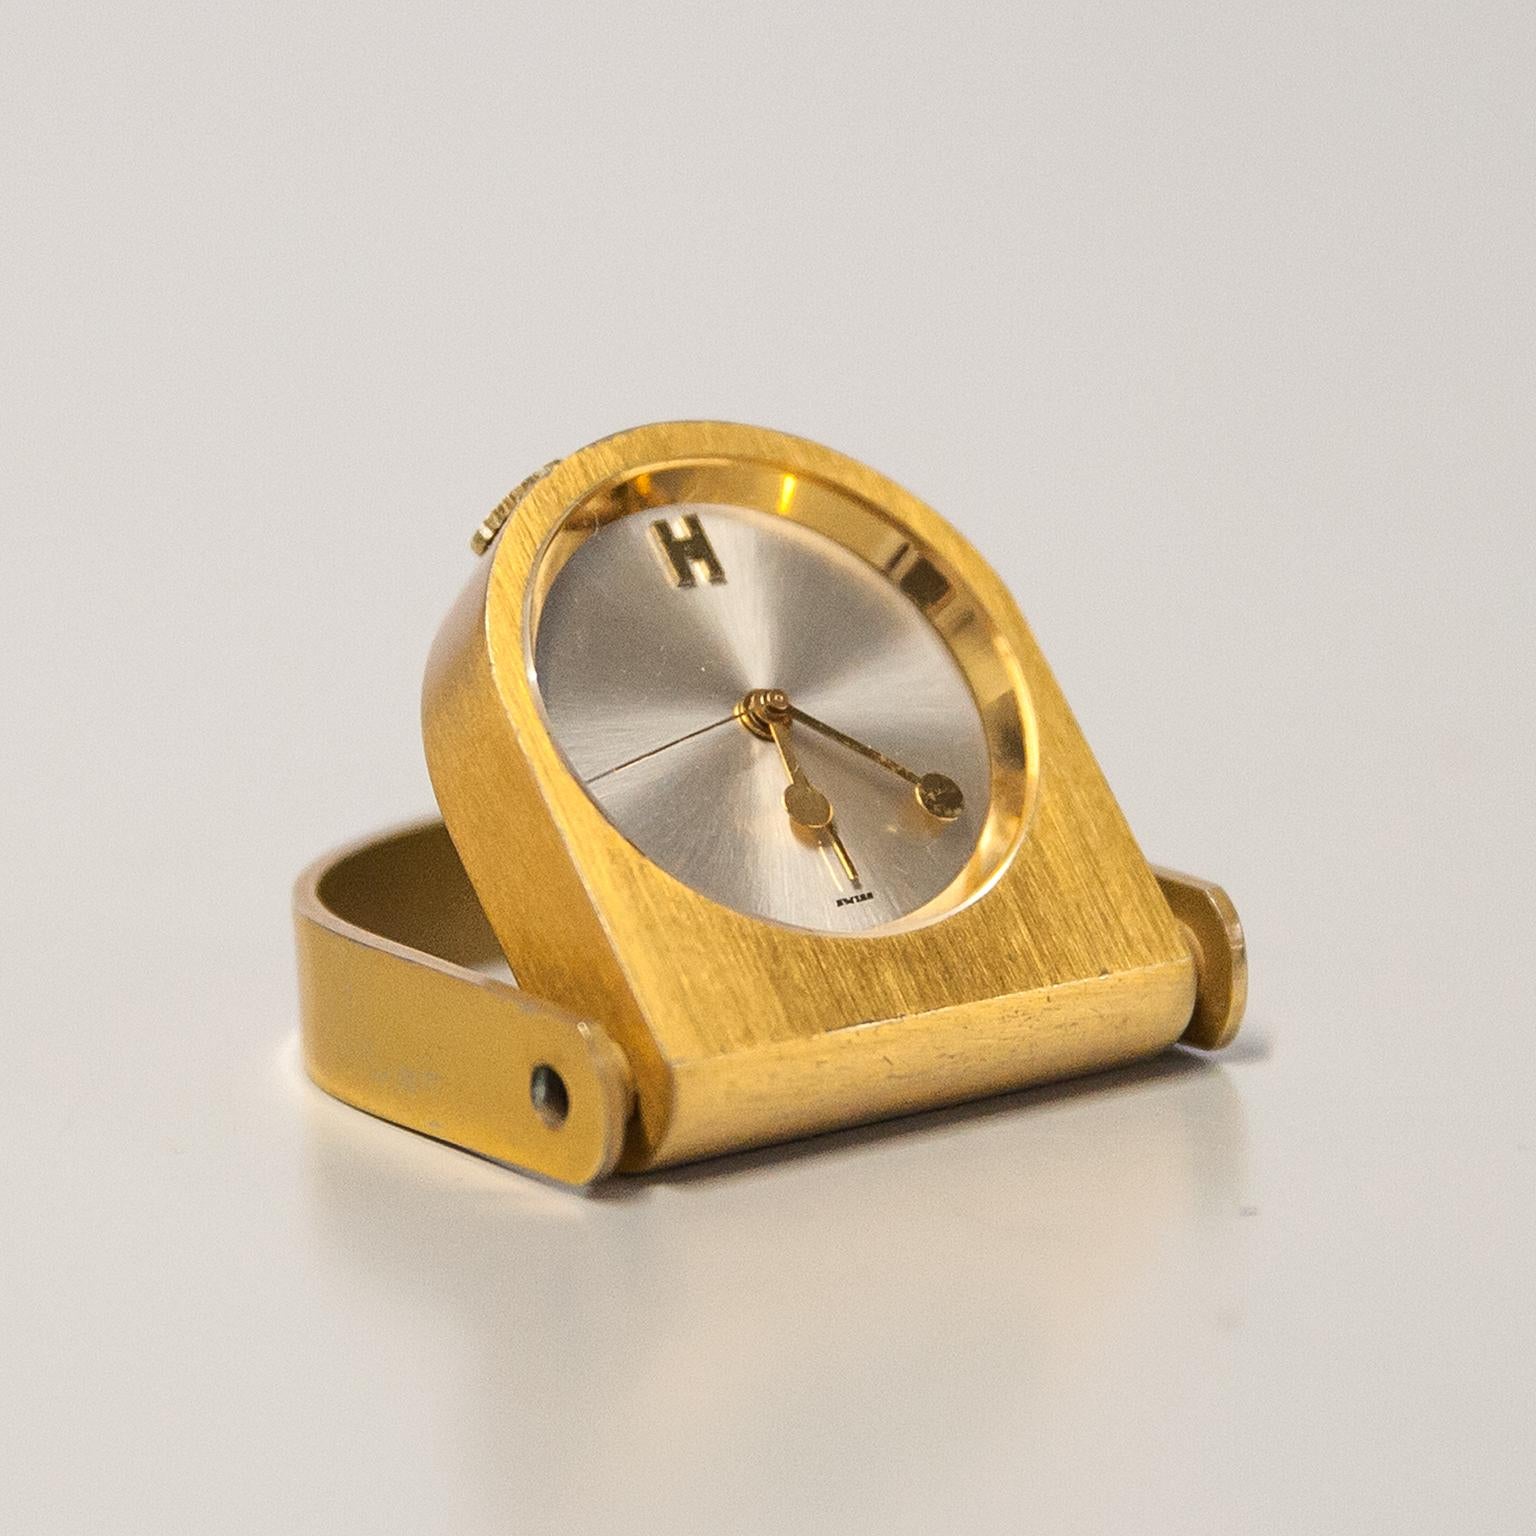 Hermès clip Table watch in brass with a Quartz-movement comes with the original box, leather etui and fabric sack.